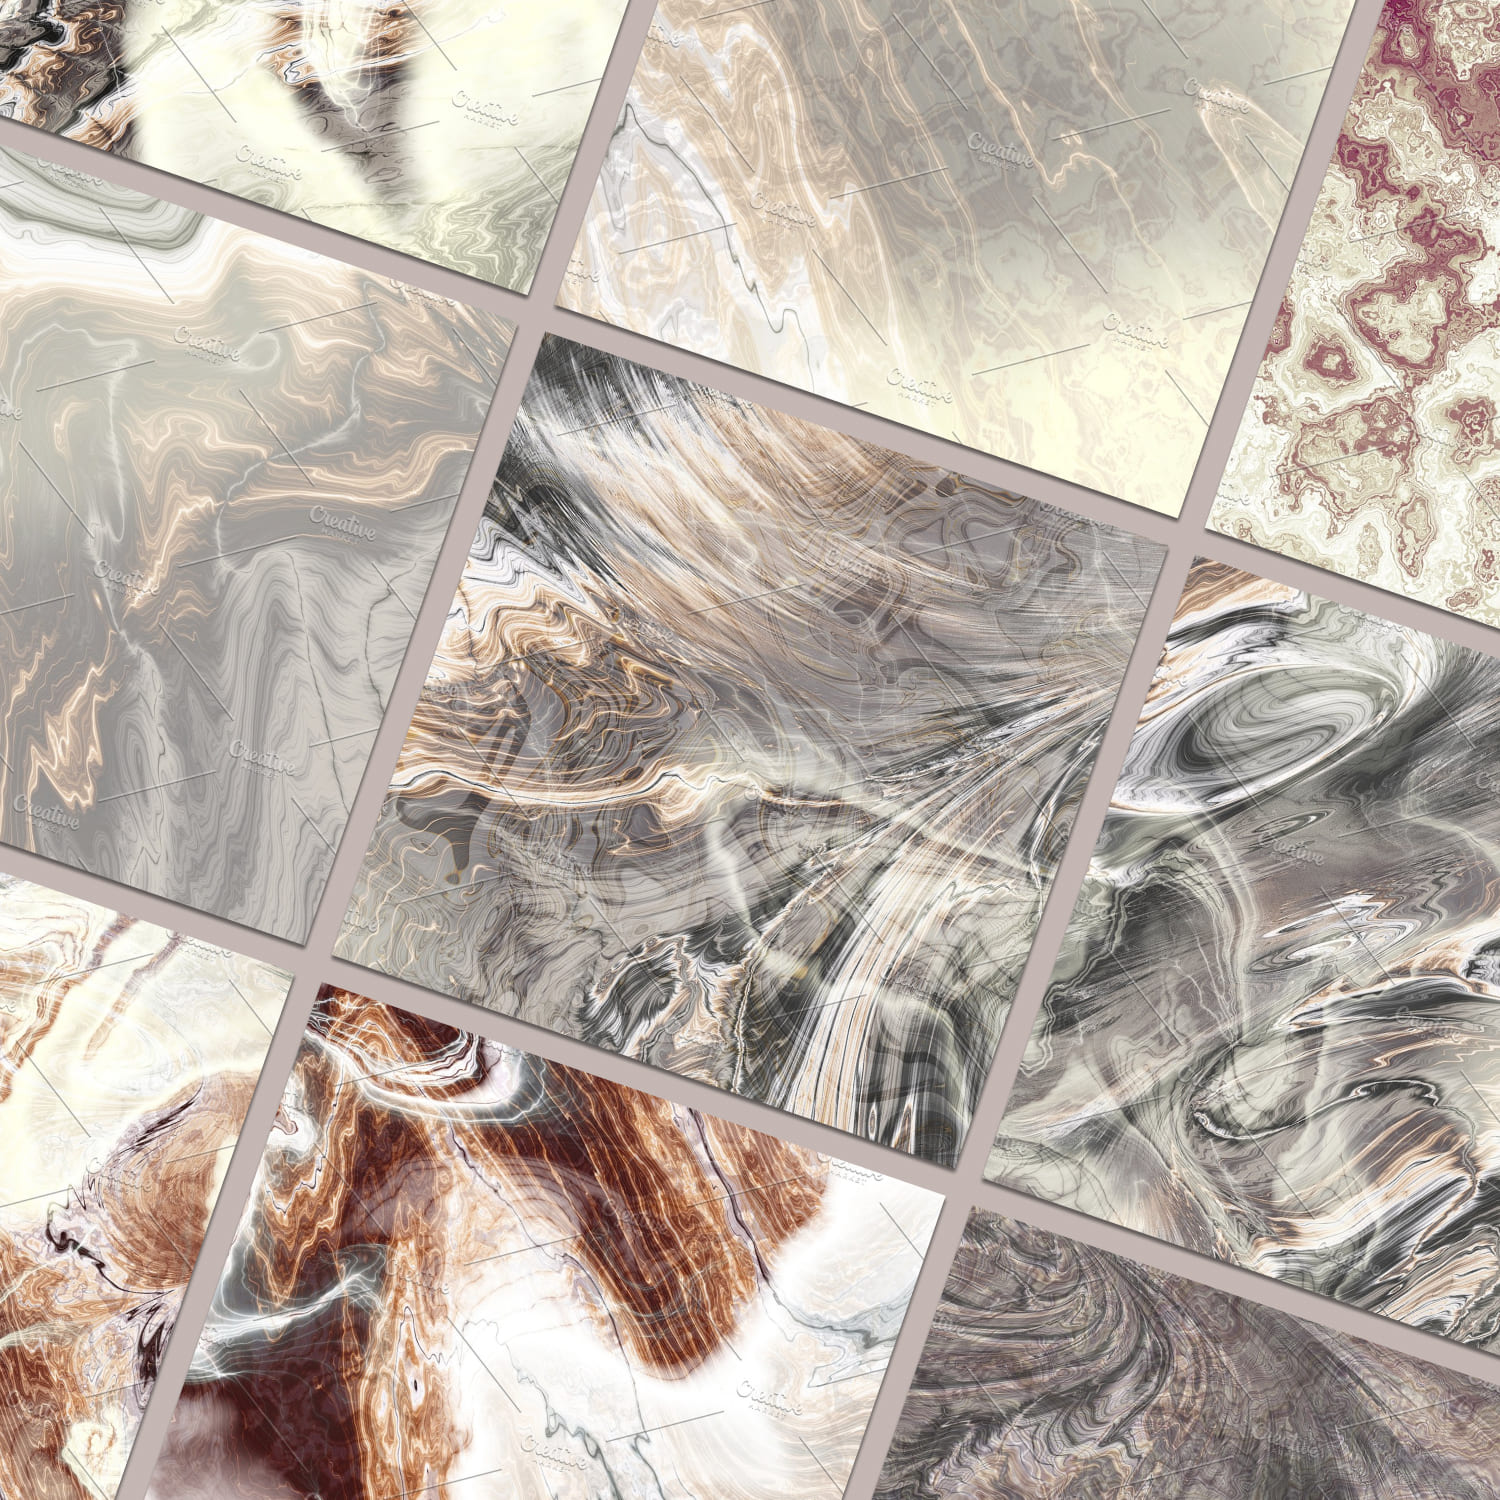 20 marble textures 300 dpi from tkdesign.